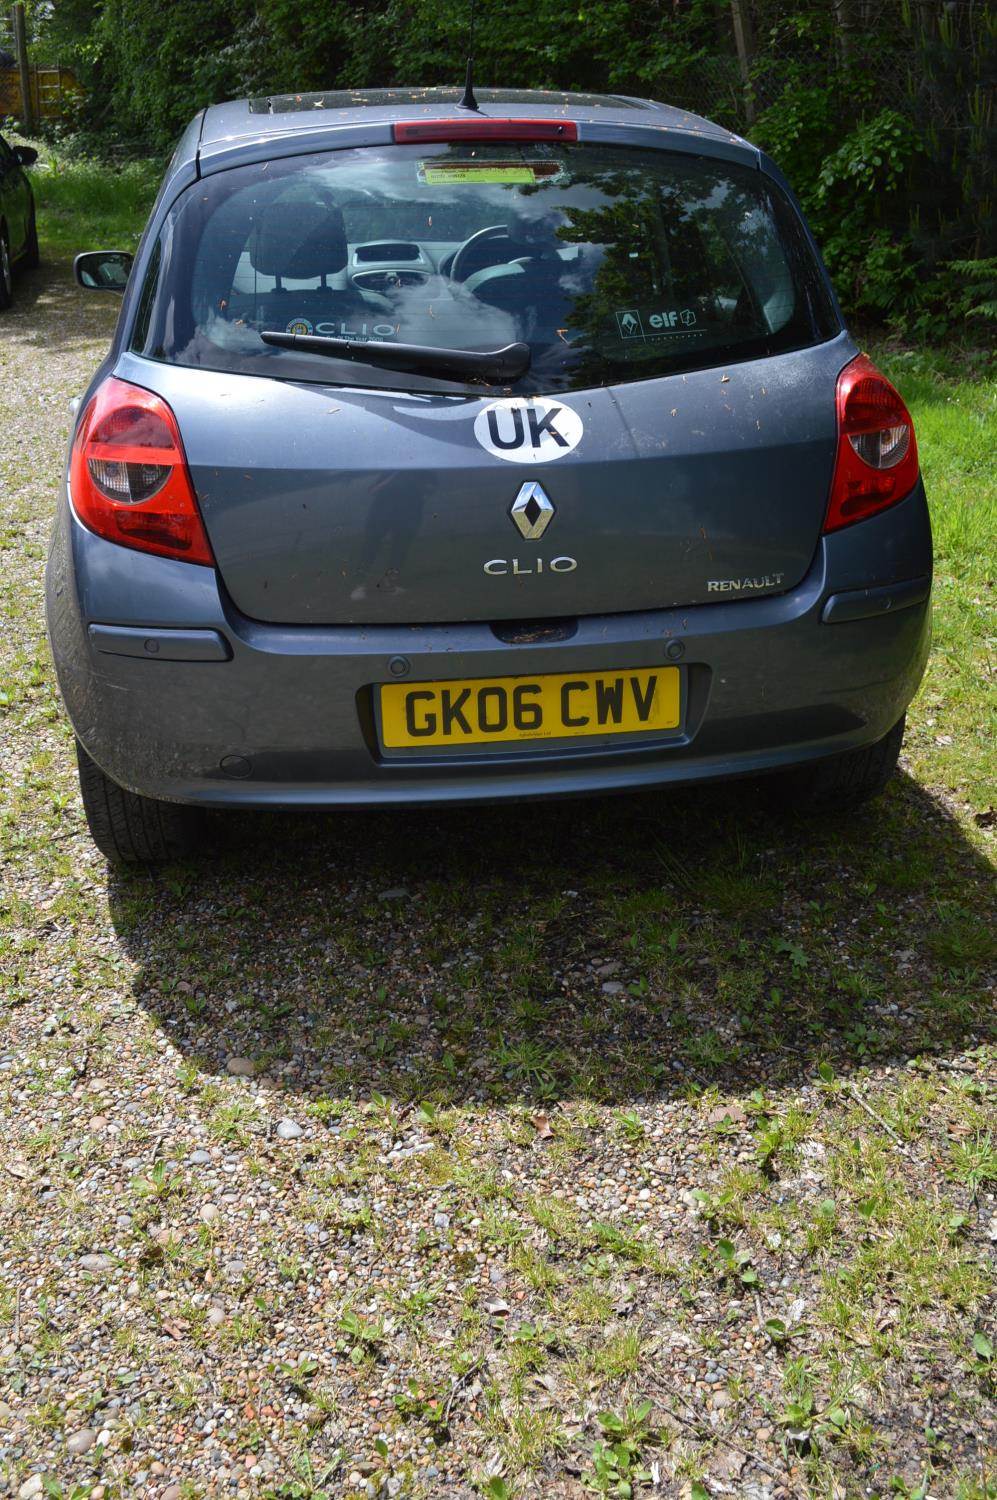 2006 Renault Clio Initiale A, 1.6 automatic, petrol, MoT March 2025, approx 80,000 miles, Reg GK06 - Image 4 of 9